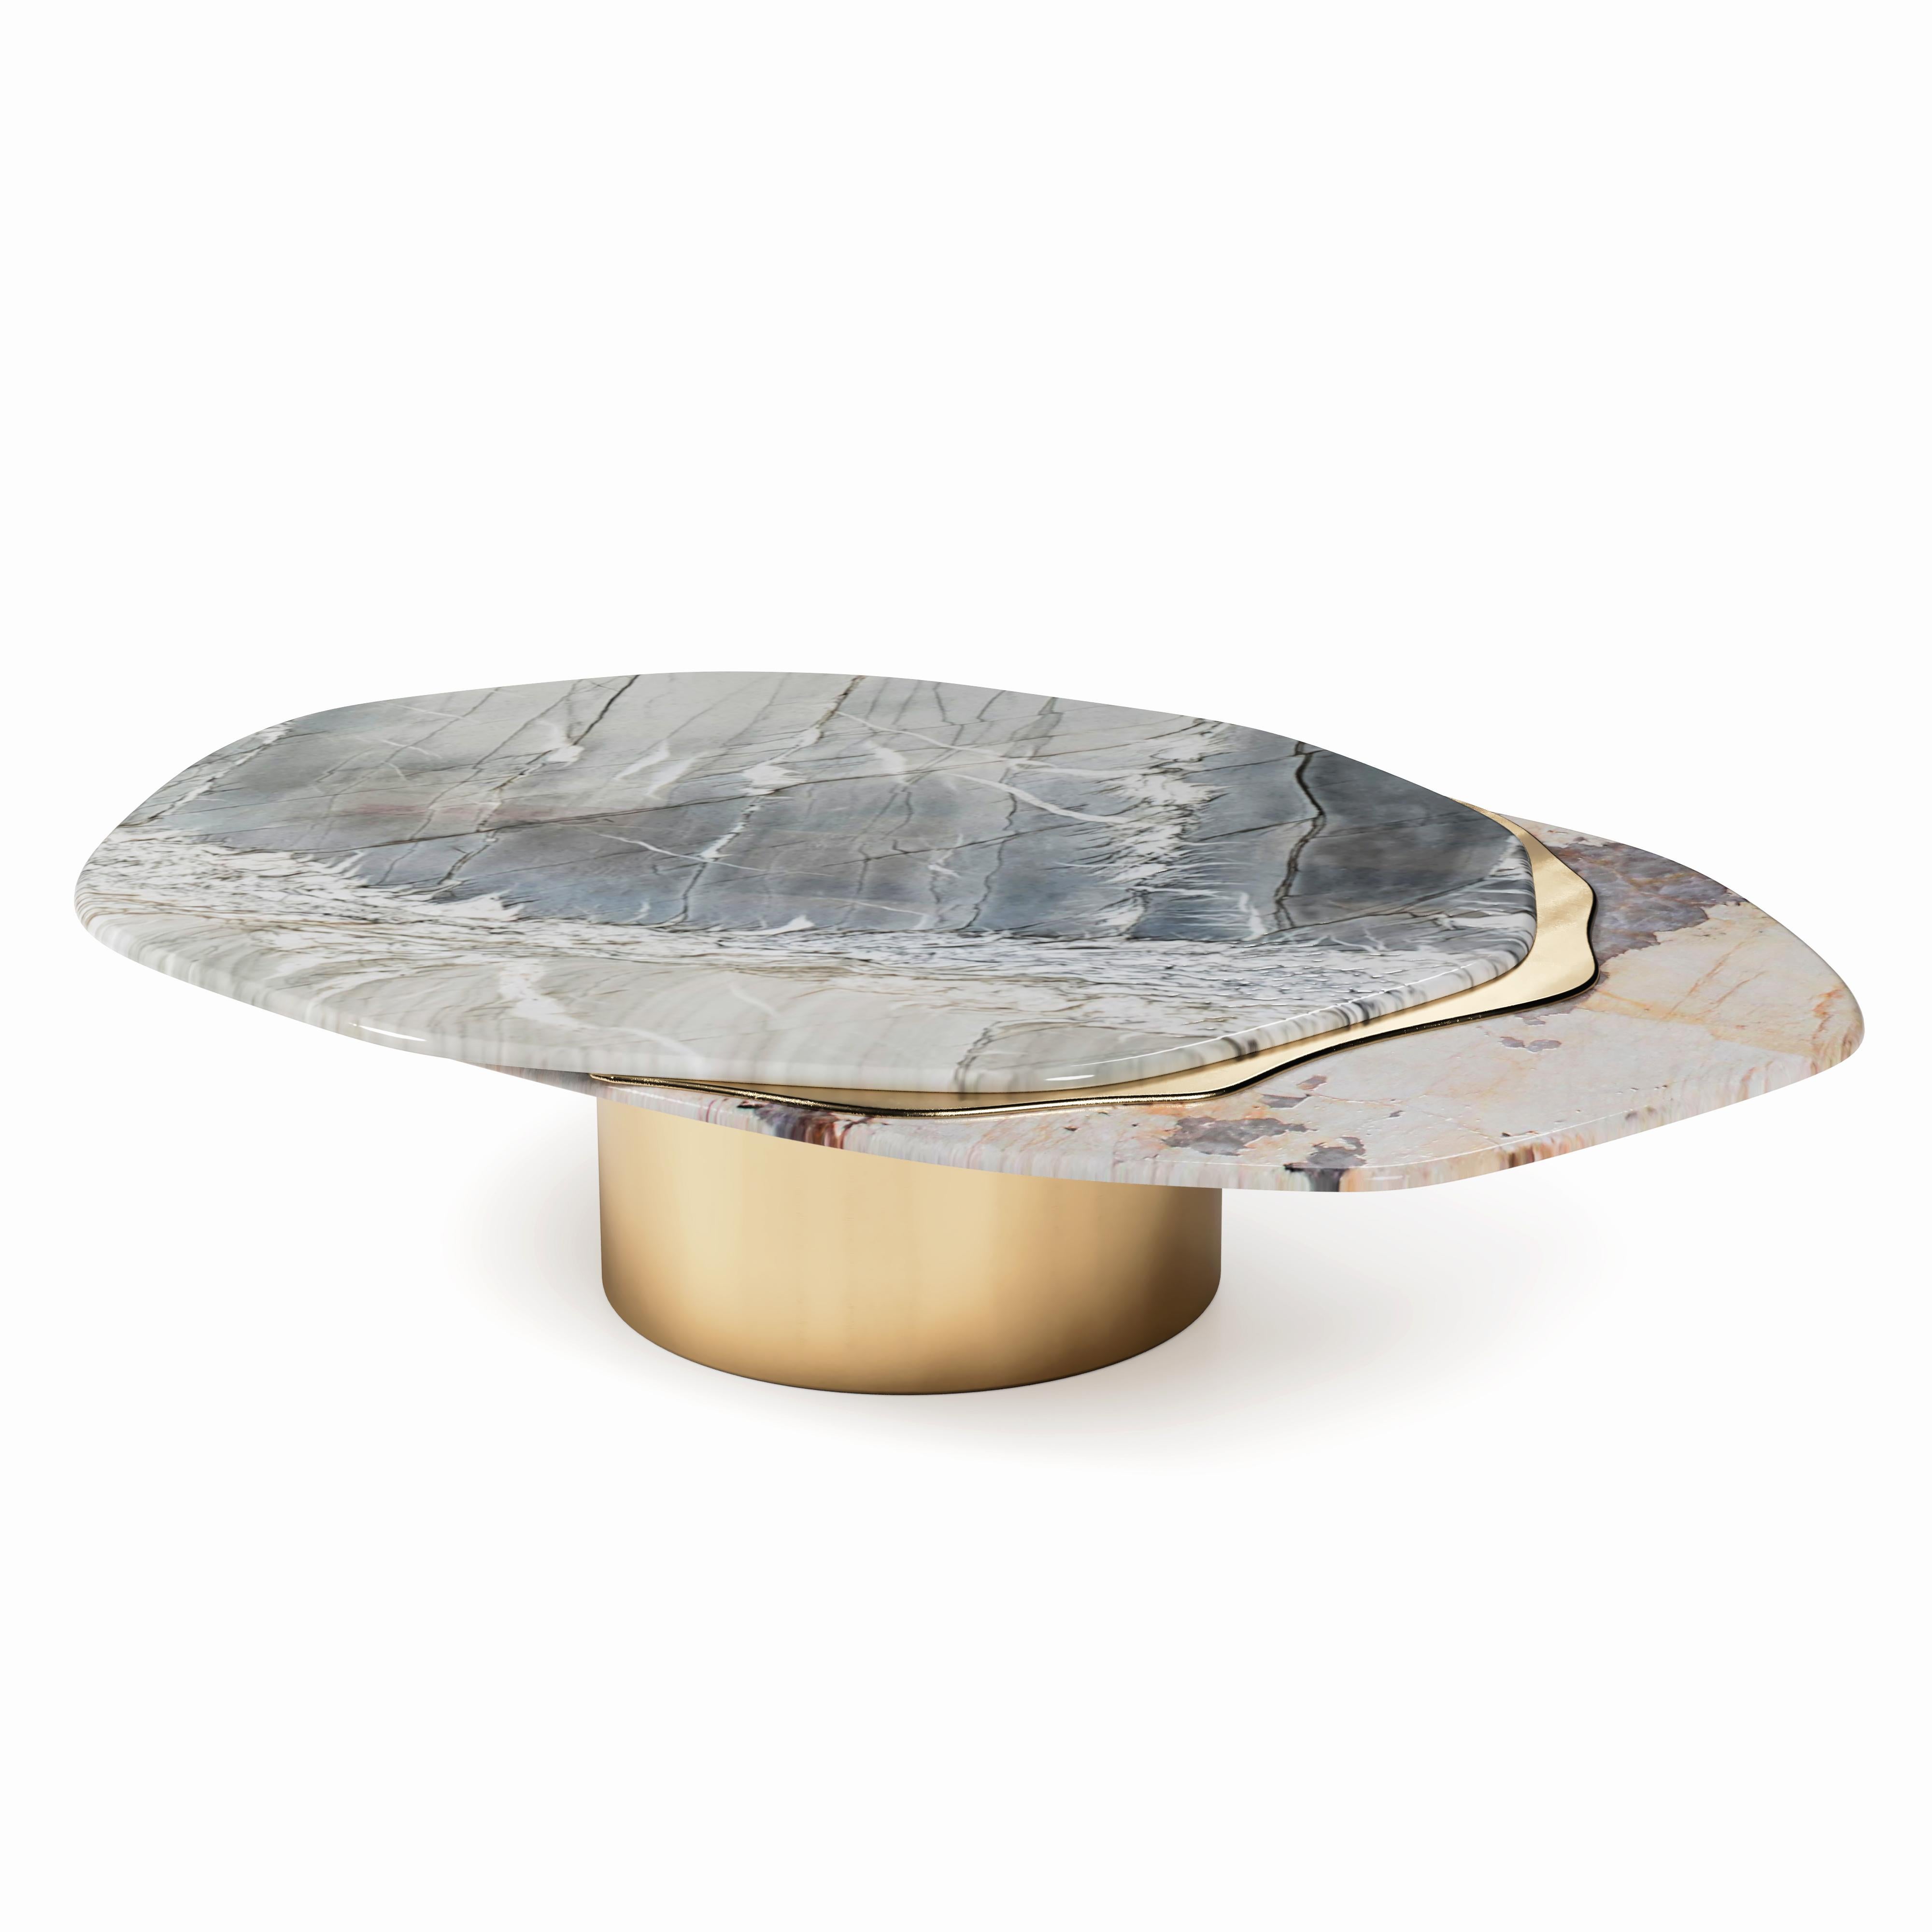 British The Elements VII Coffee Table, 1 of 1 by Grzegorz Majka